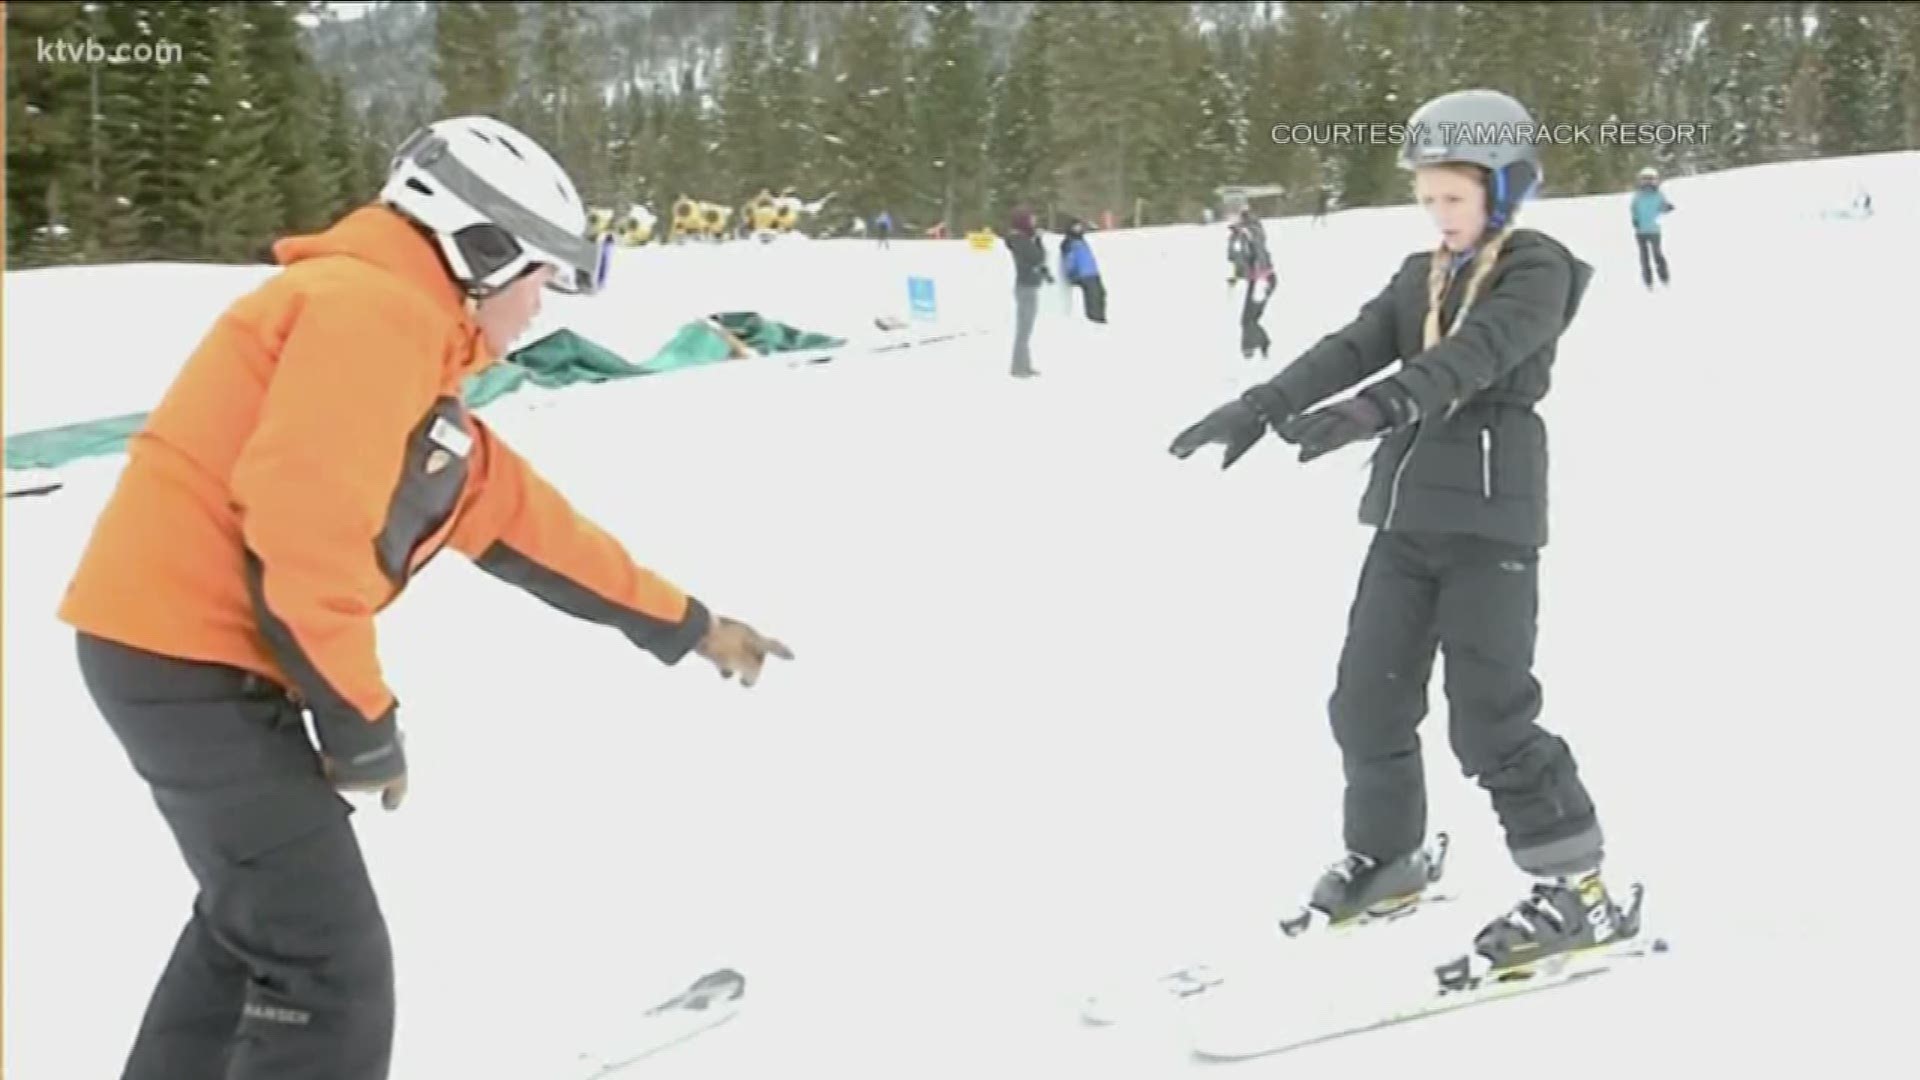 Tamarack hopes the free lessons will inspire more people to take up skiing and snowboarding.